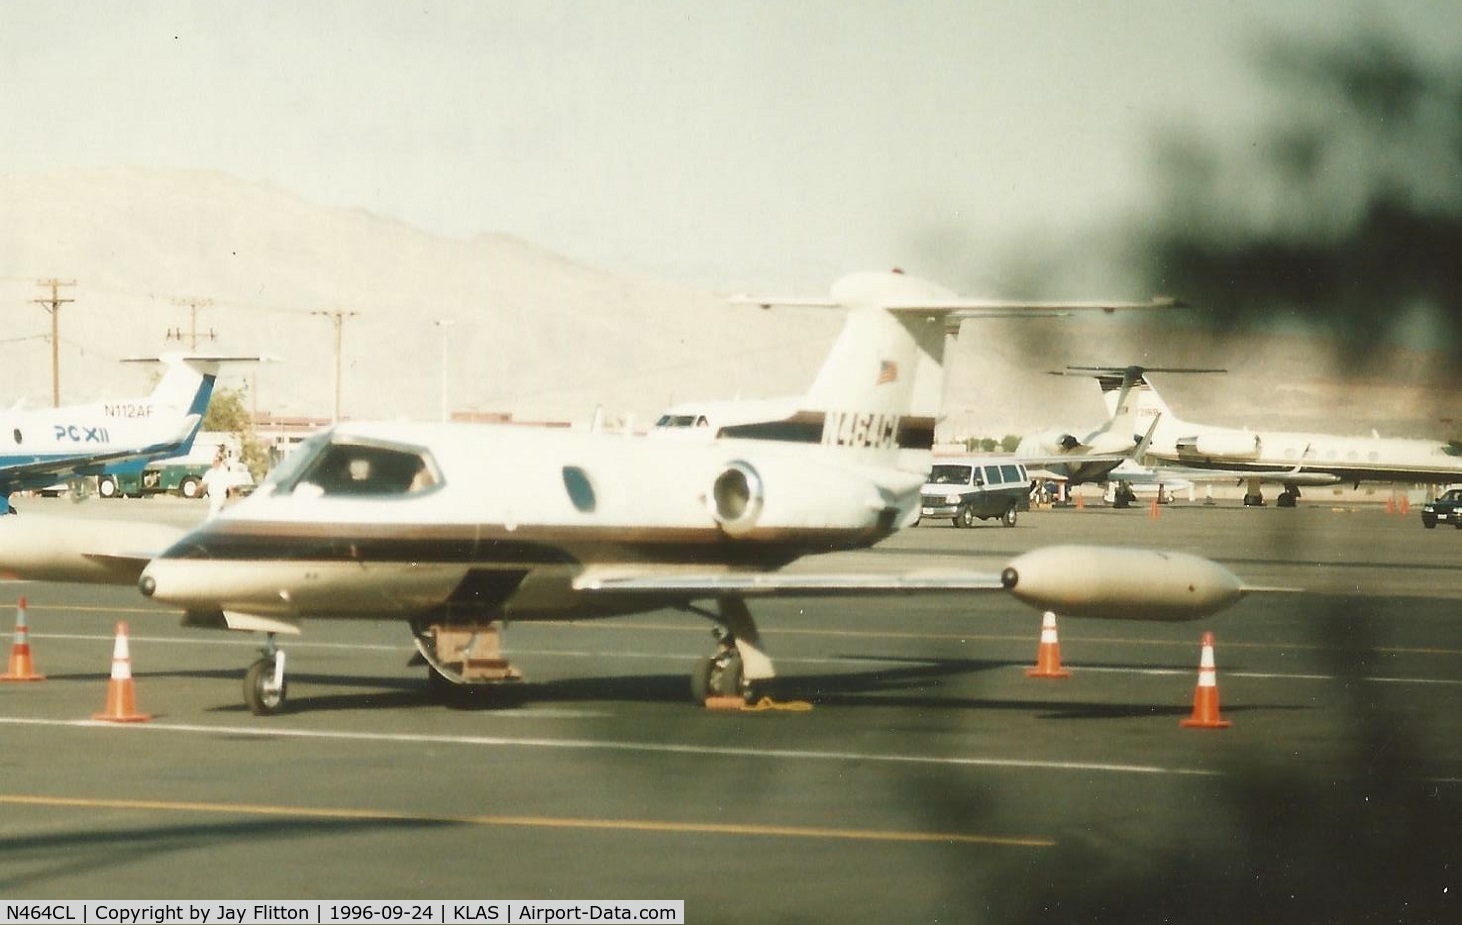 N464CL, 1966 Learjet 24A C/N 096, N464CL at KLAS. Scanned from print. Minolta X-570 with 210mm f4.2 lens. At Signature Flight Support, Las Vegas, 24-SEP-96. This was durning the NBAA  Convention.